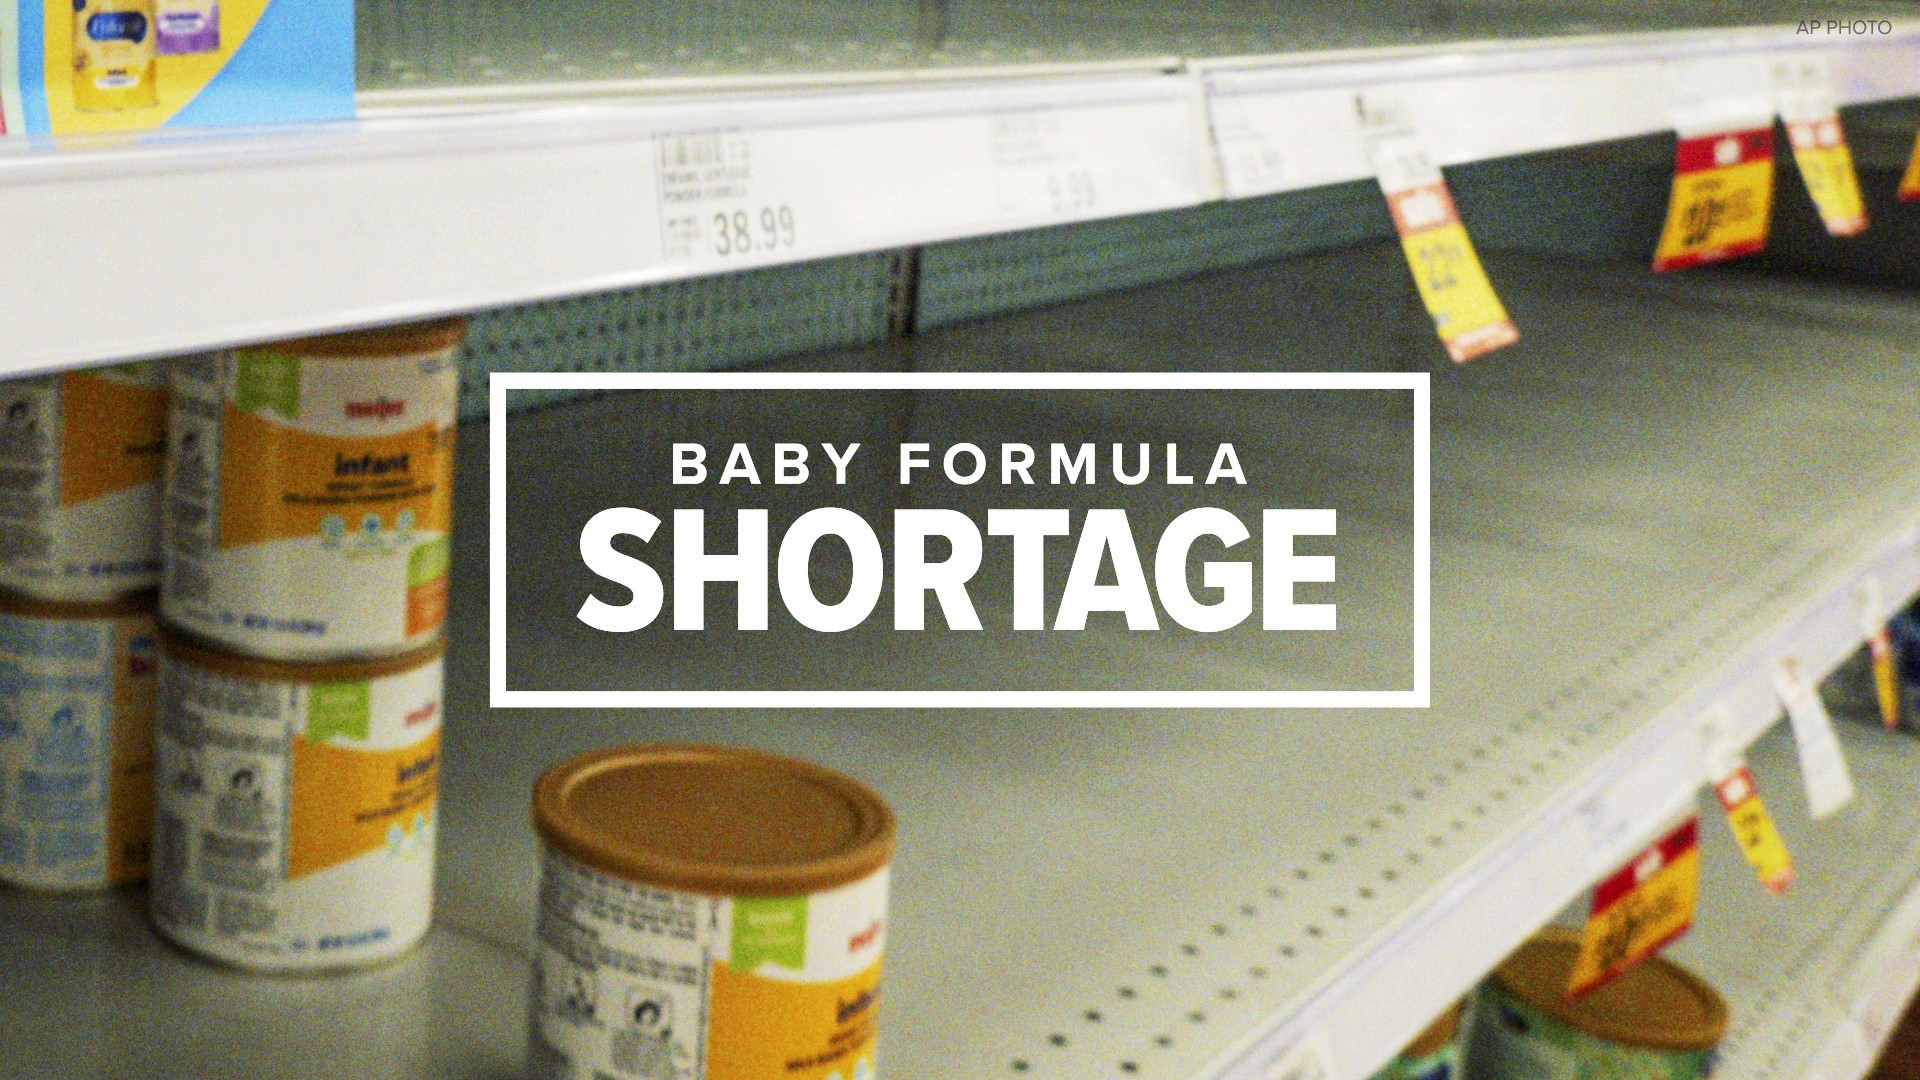 Dr. Philip Heavner, a pediatrician at Guthrie Clinic, warns of the dangers that will come with the baby formula shortage.